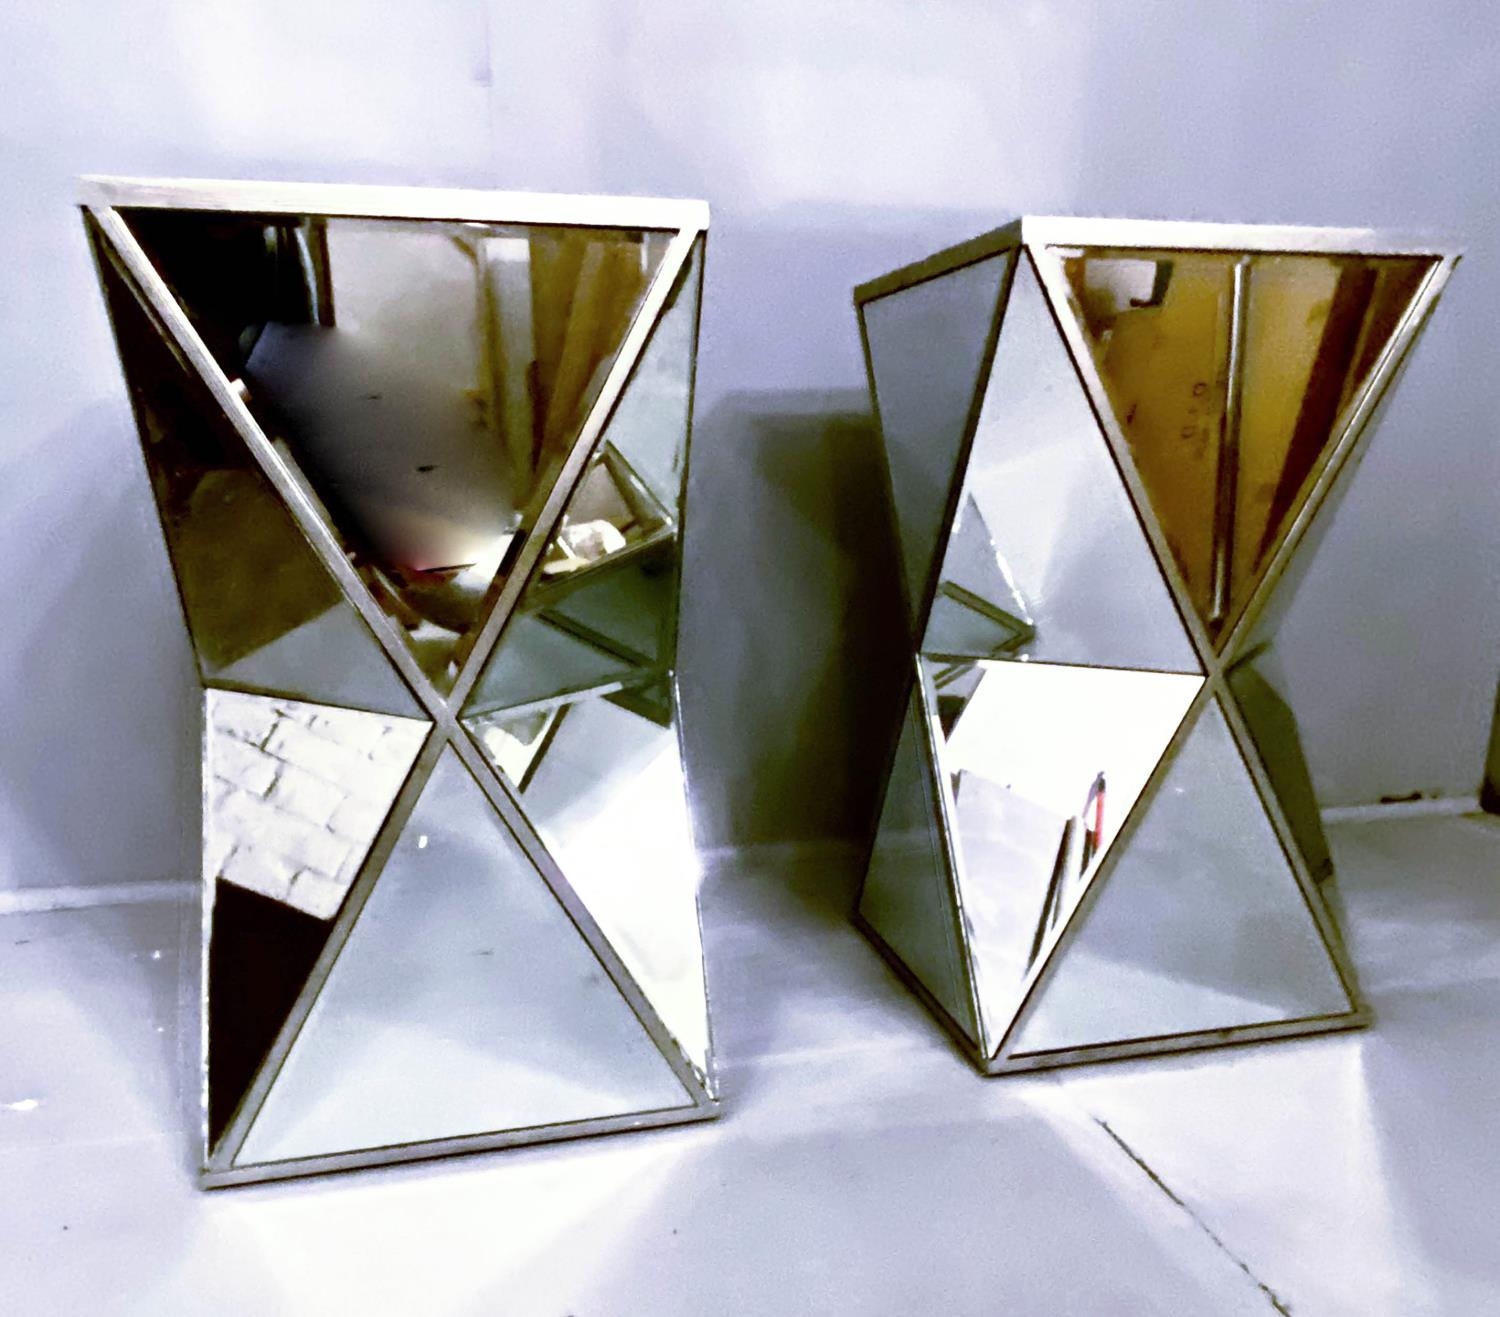 PEDESTALS, a pair, 61cm H x 34cm W, of square form, 1970s Italian style, mirrored glass sides,